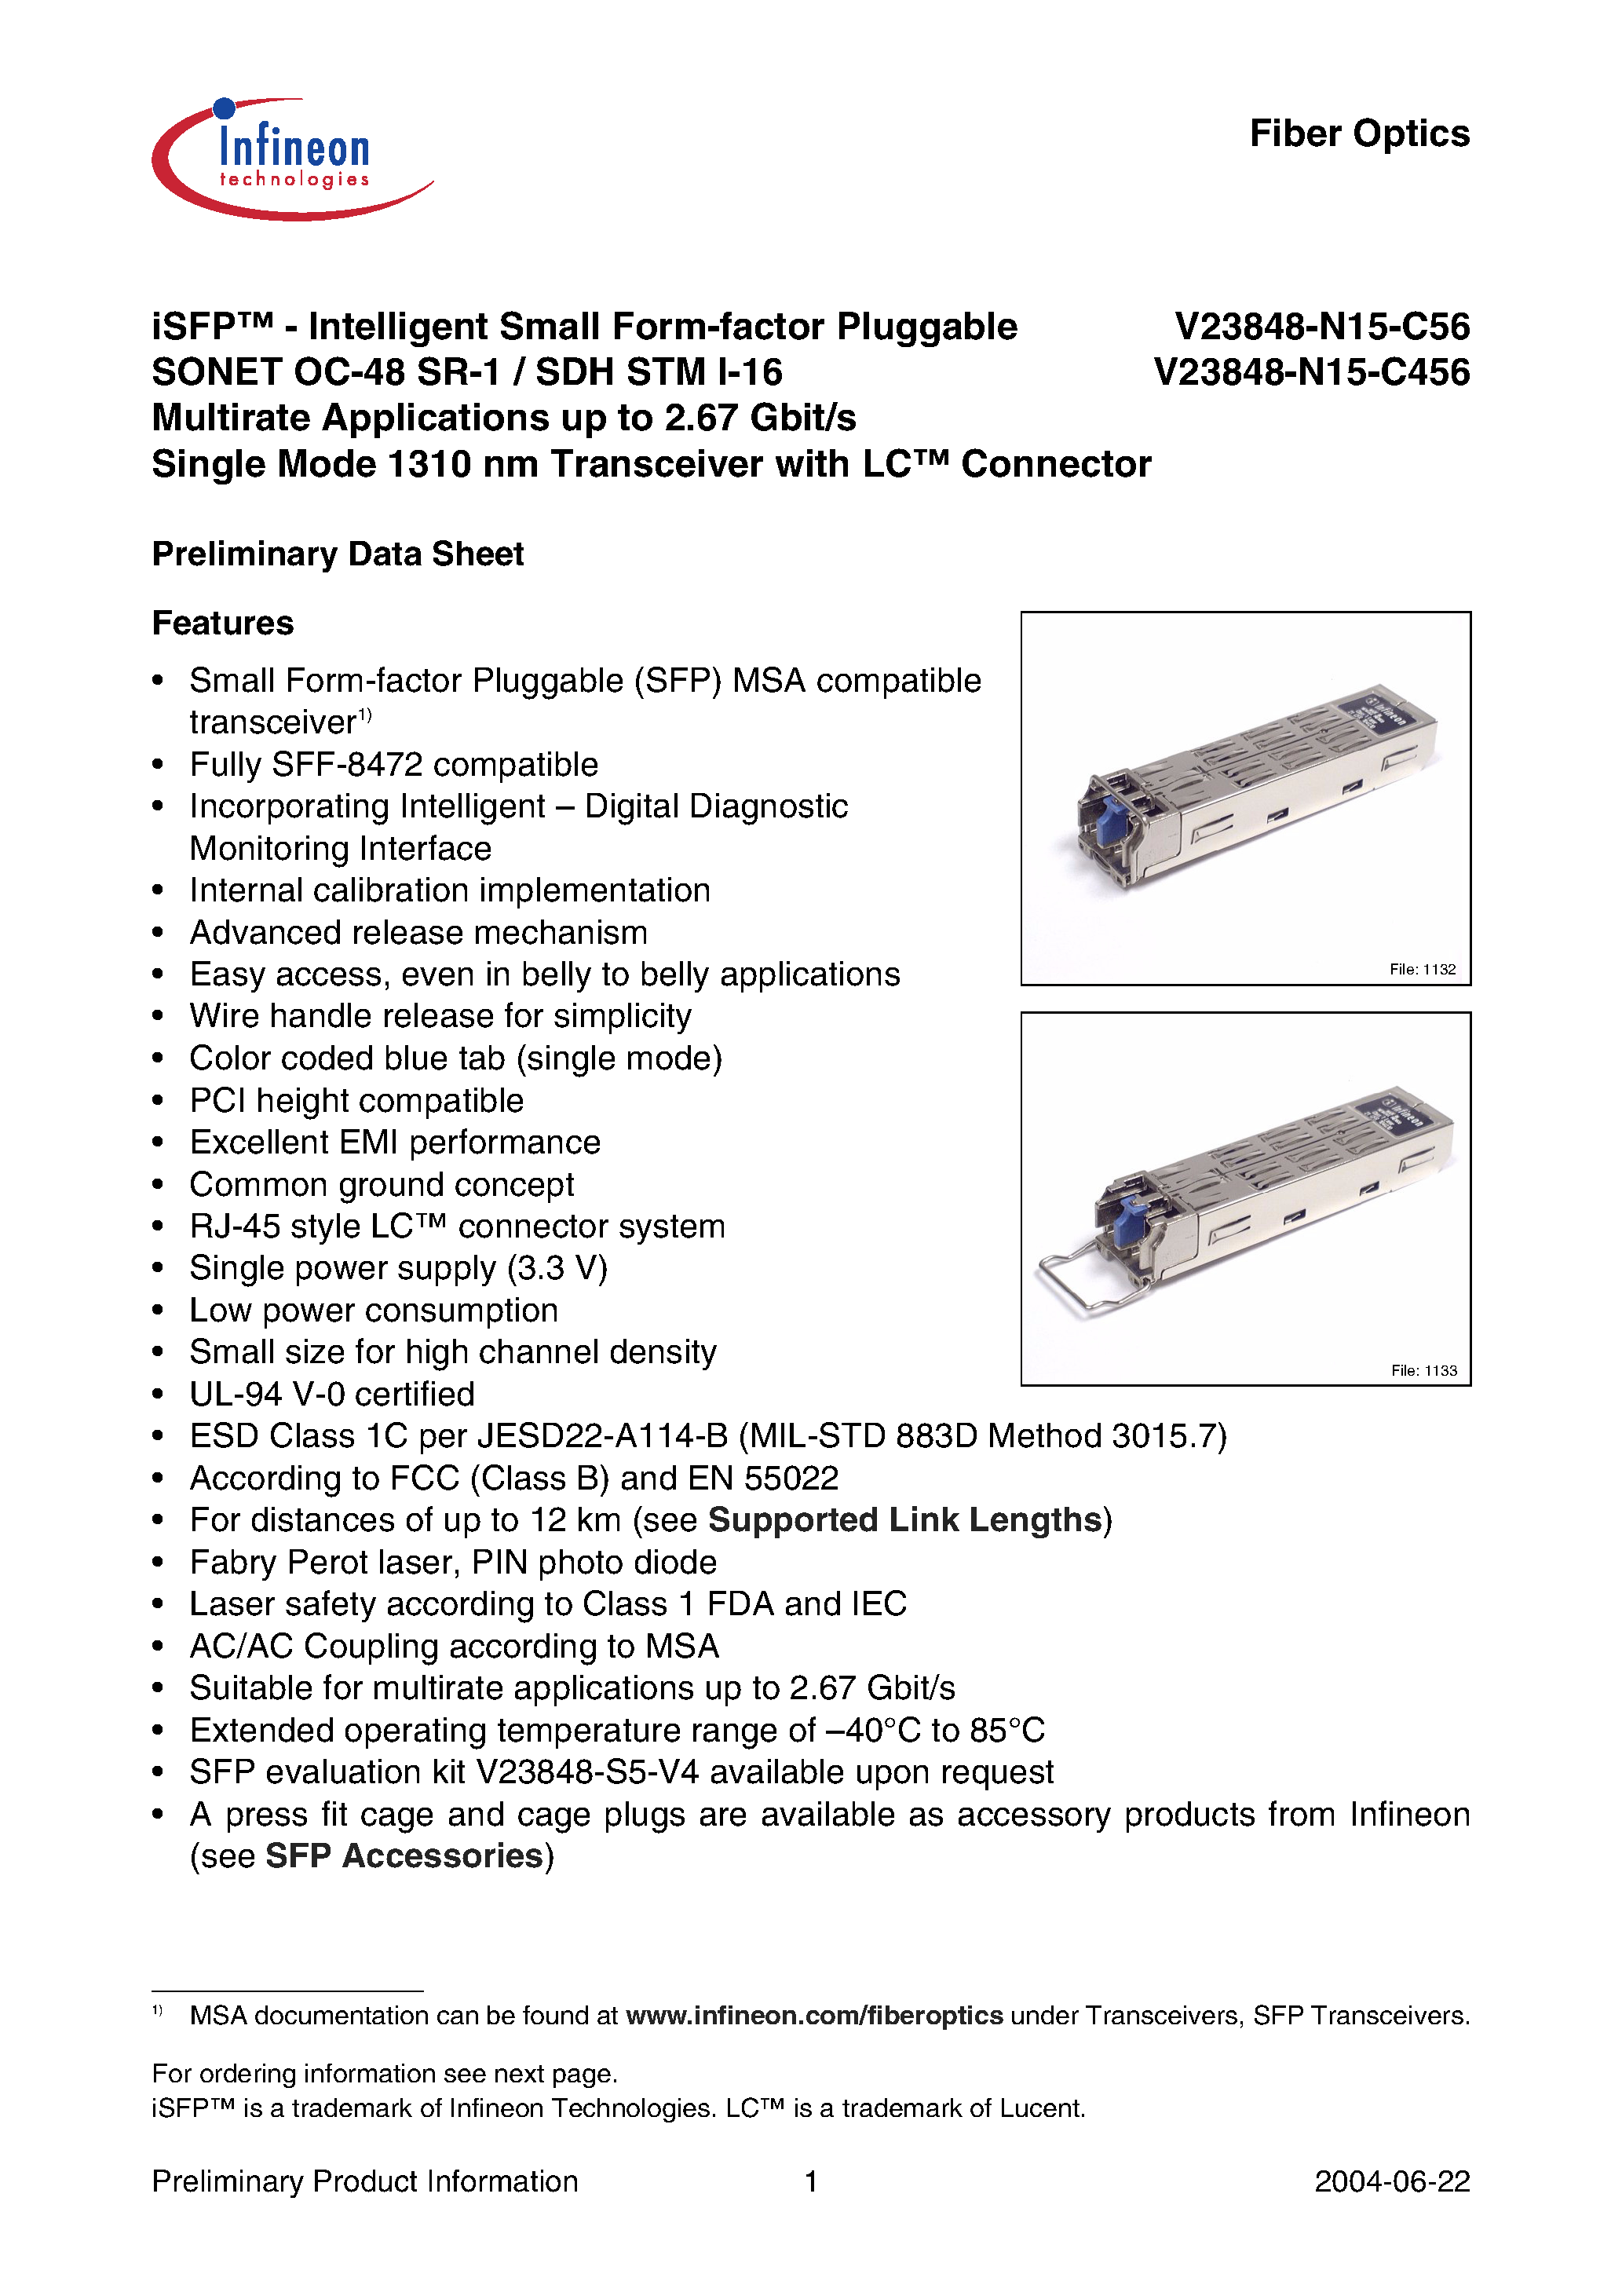 Datasheet V23848-N15-C456 - iSFP-Intelligent Small Form-factor Pluggable SONET OC-48 SR-1 / SDH STM I-16 Multirate Applications up to 2.67 Gbit/s page 1